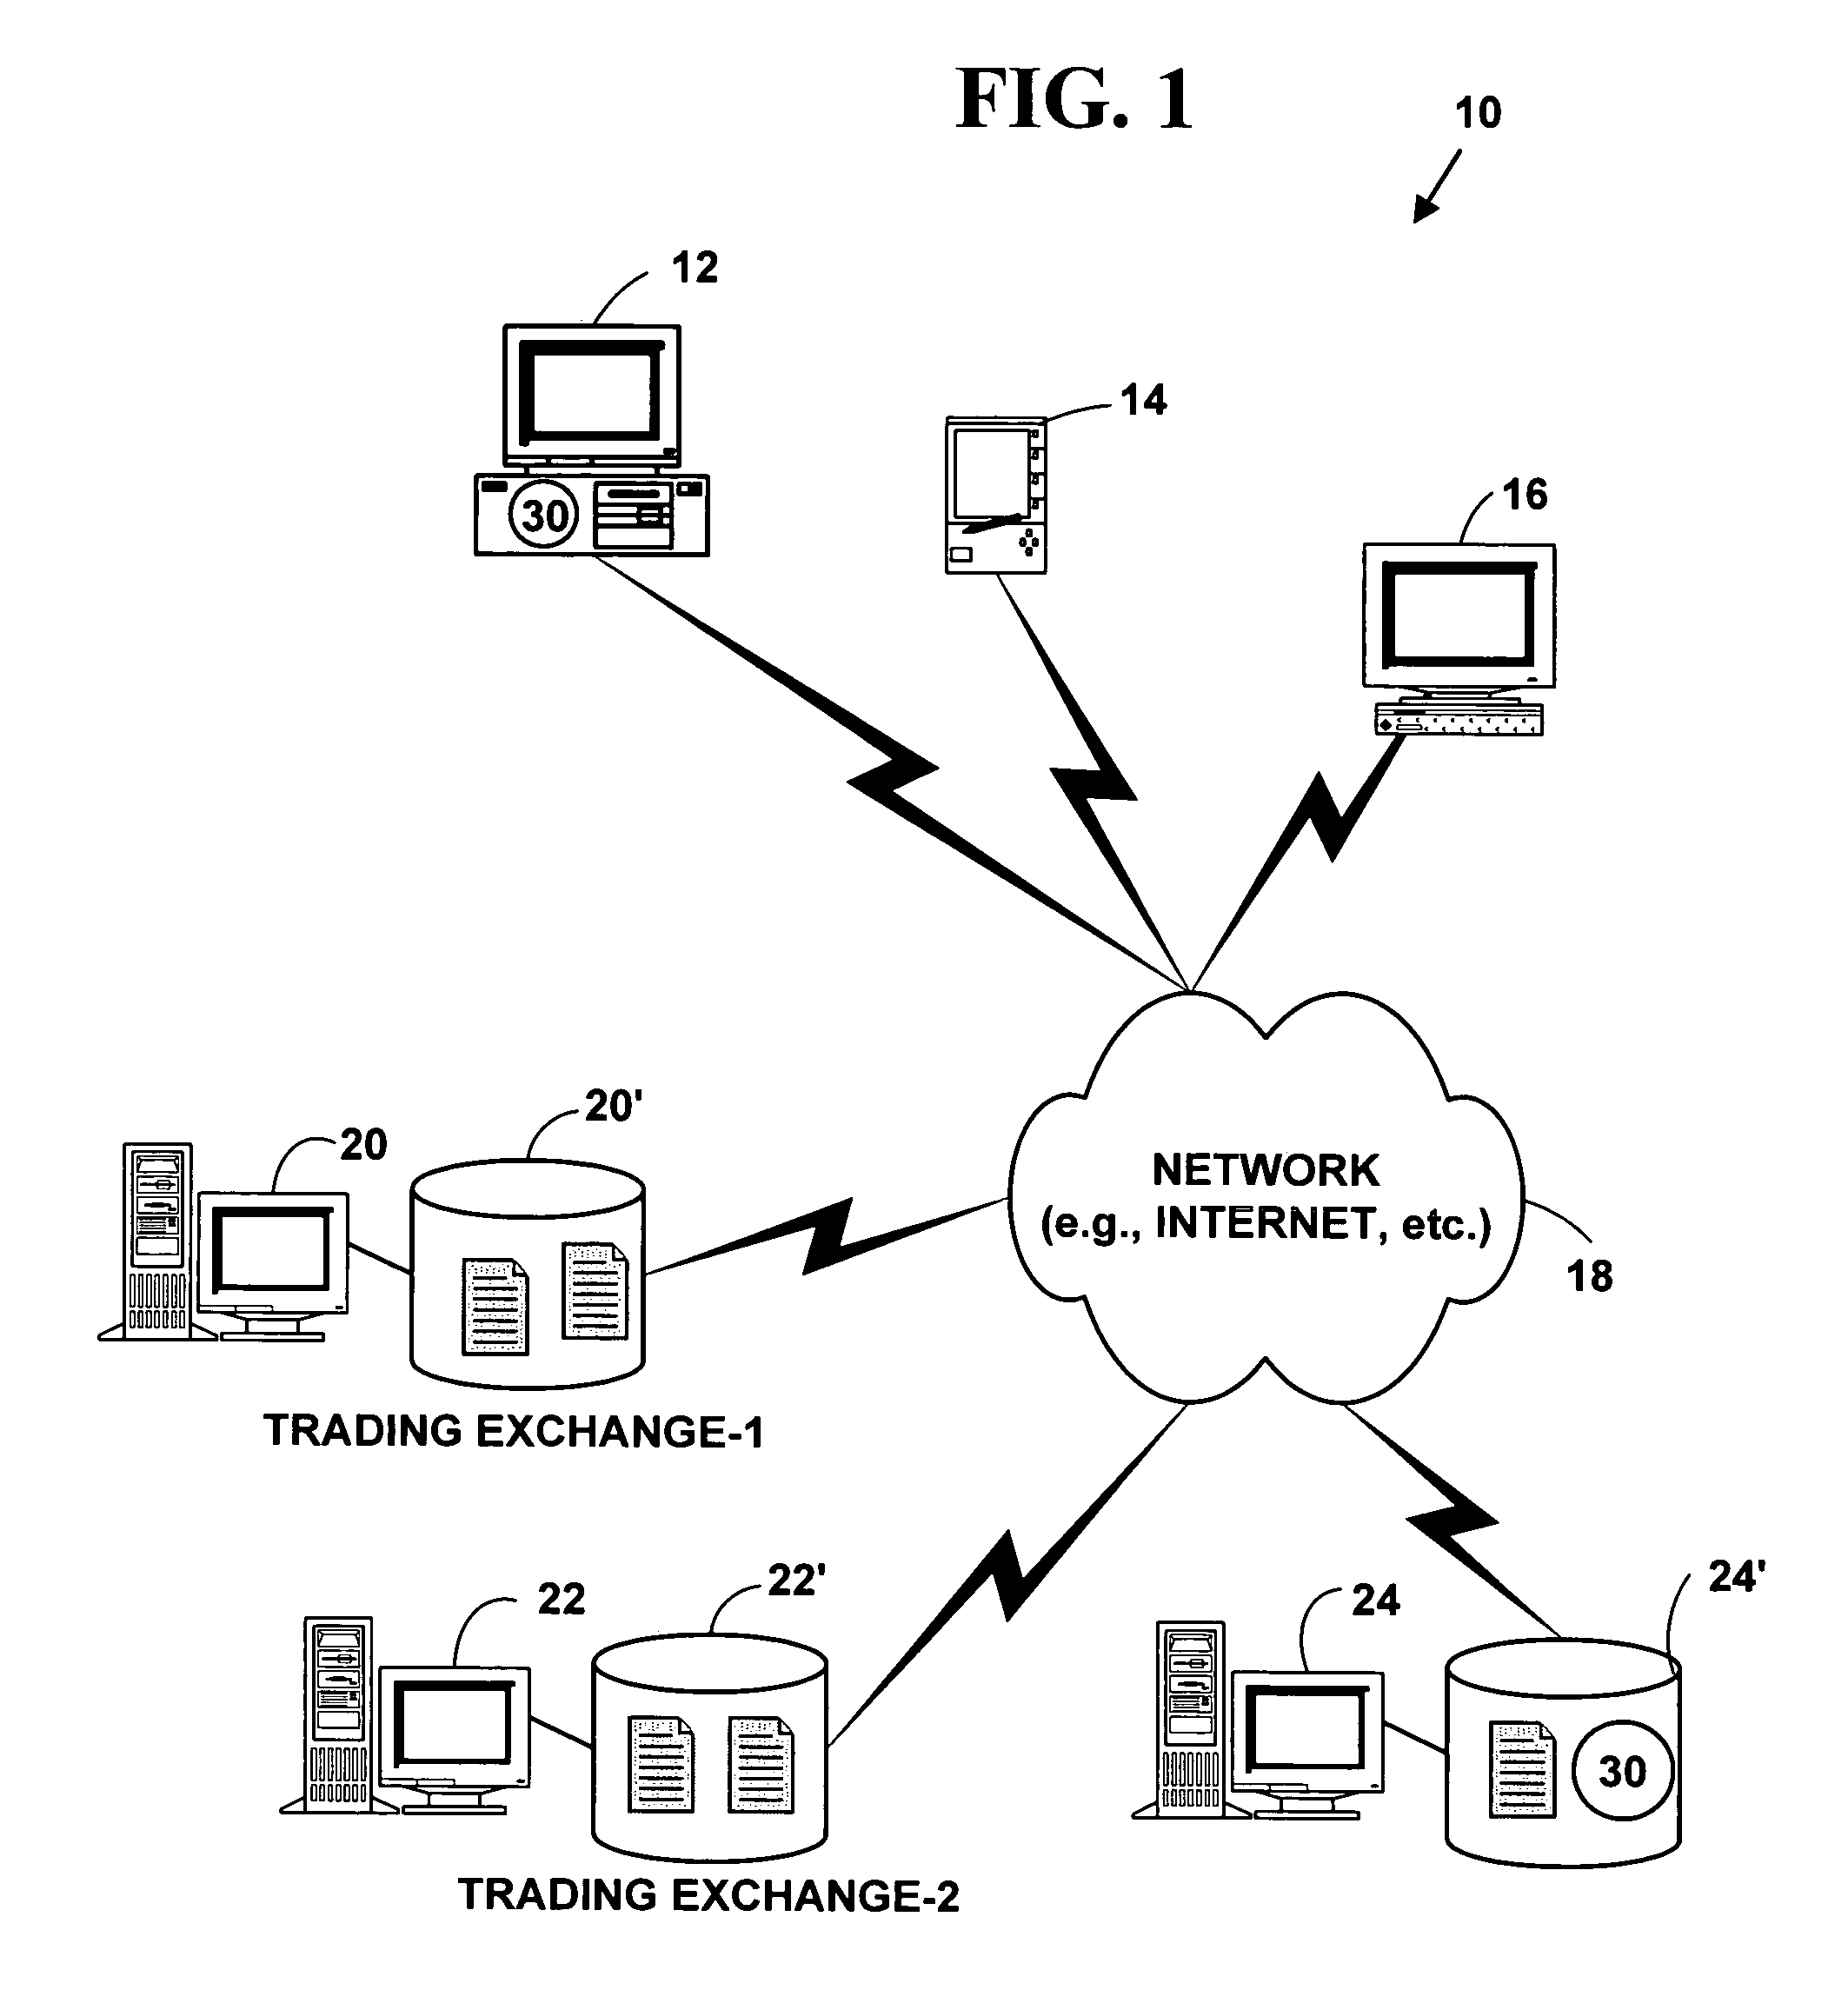 Method and system for providing automatic execution of black box strategies for electronic trading